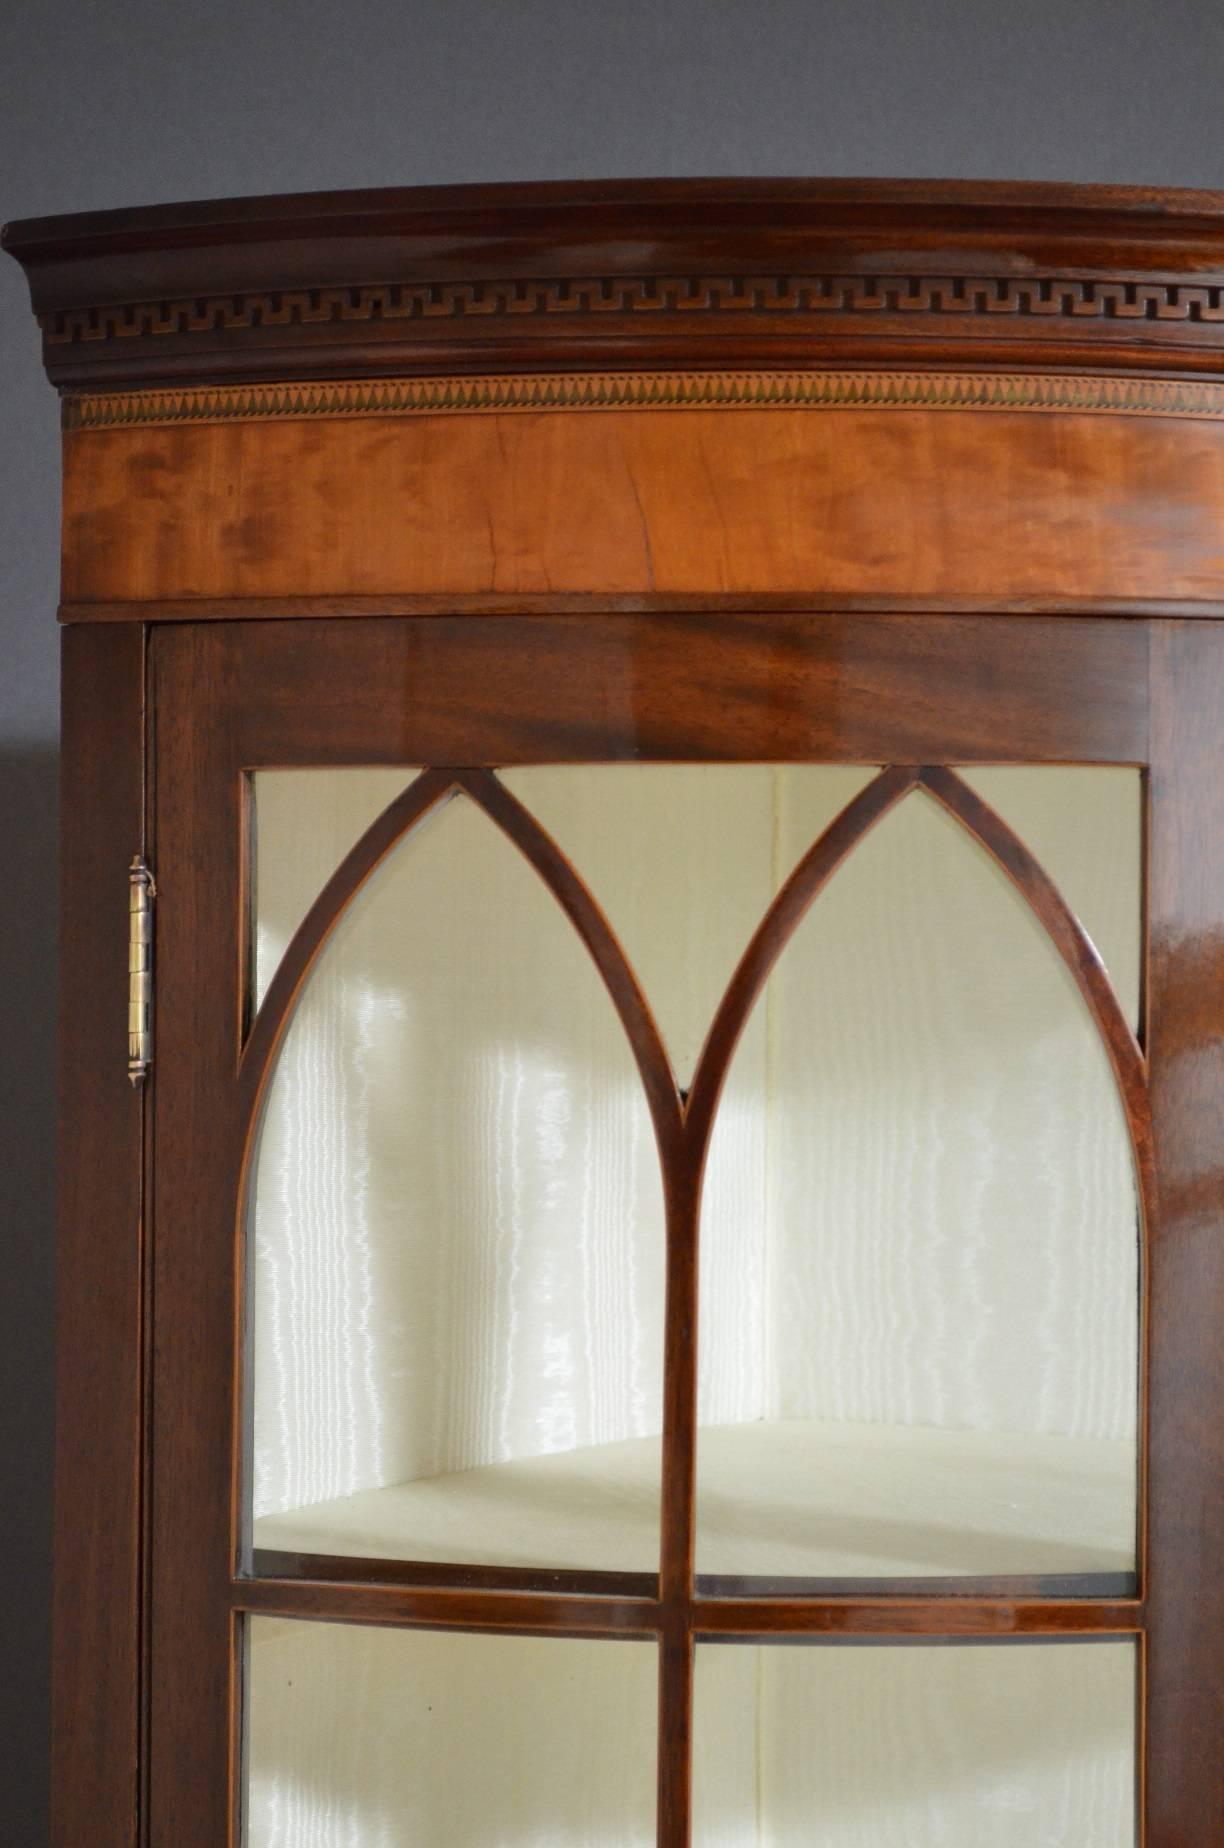 Sn4028, a fine quality and very rare Edwardian, mahogany and inlaid corner cabinet, having cavetto cornice with Greek key carving and satinwood banded frieze above a pair of glazed convex doors enclosing clean relined interior with two shelves, the